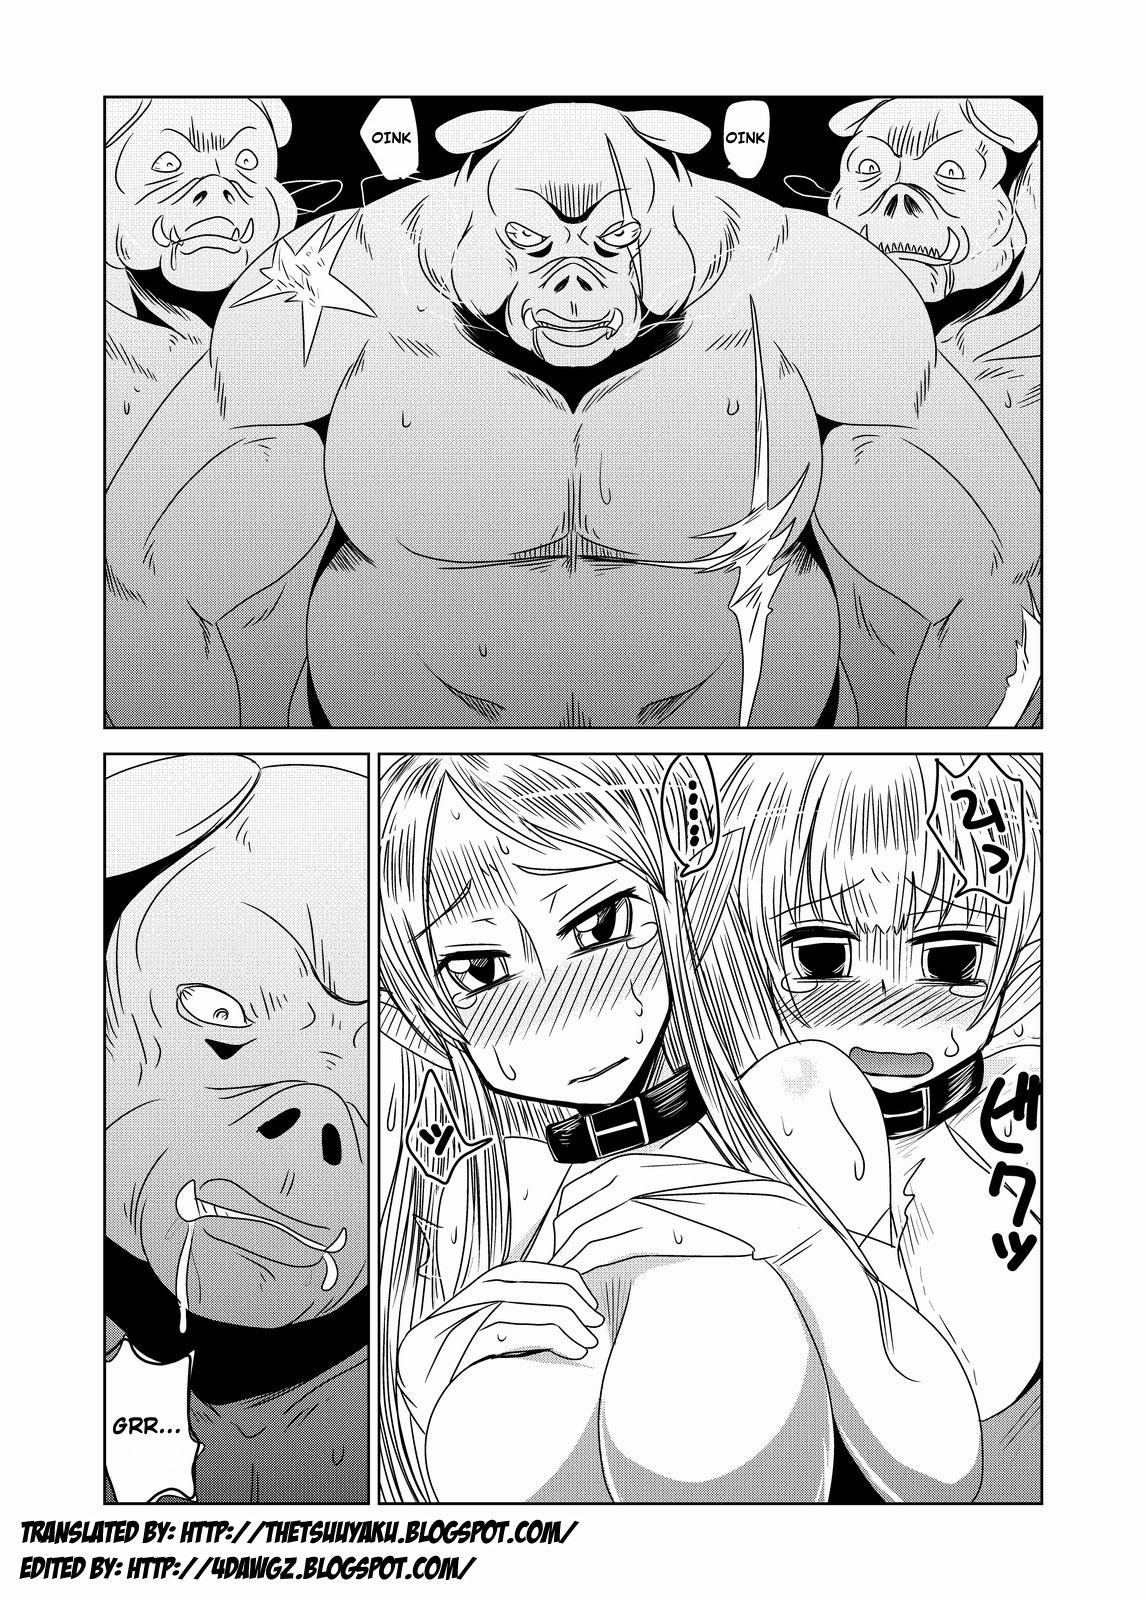 Por Orc Dakara Elf Osotta Zenin Succubus Datta wa. | We Assaulted Some Elves Because We're Orcs But It Turns Out They Were All Actually Succubi Porno 18 - Page 2